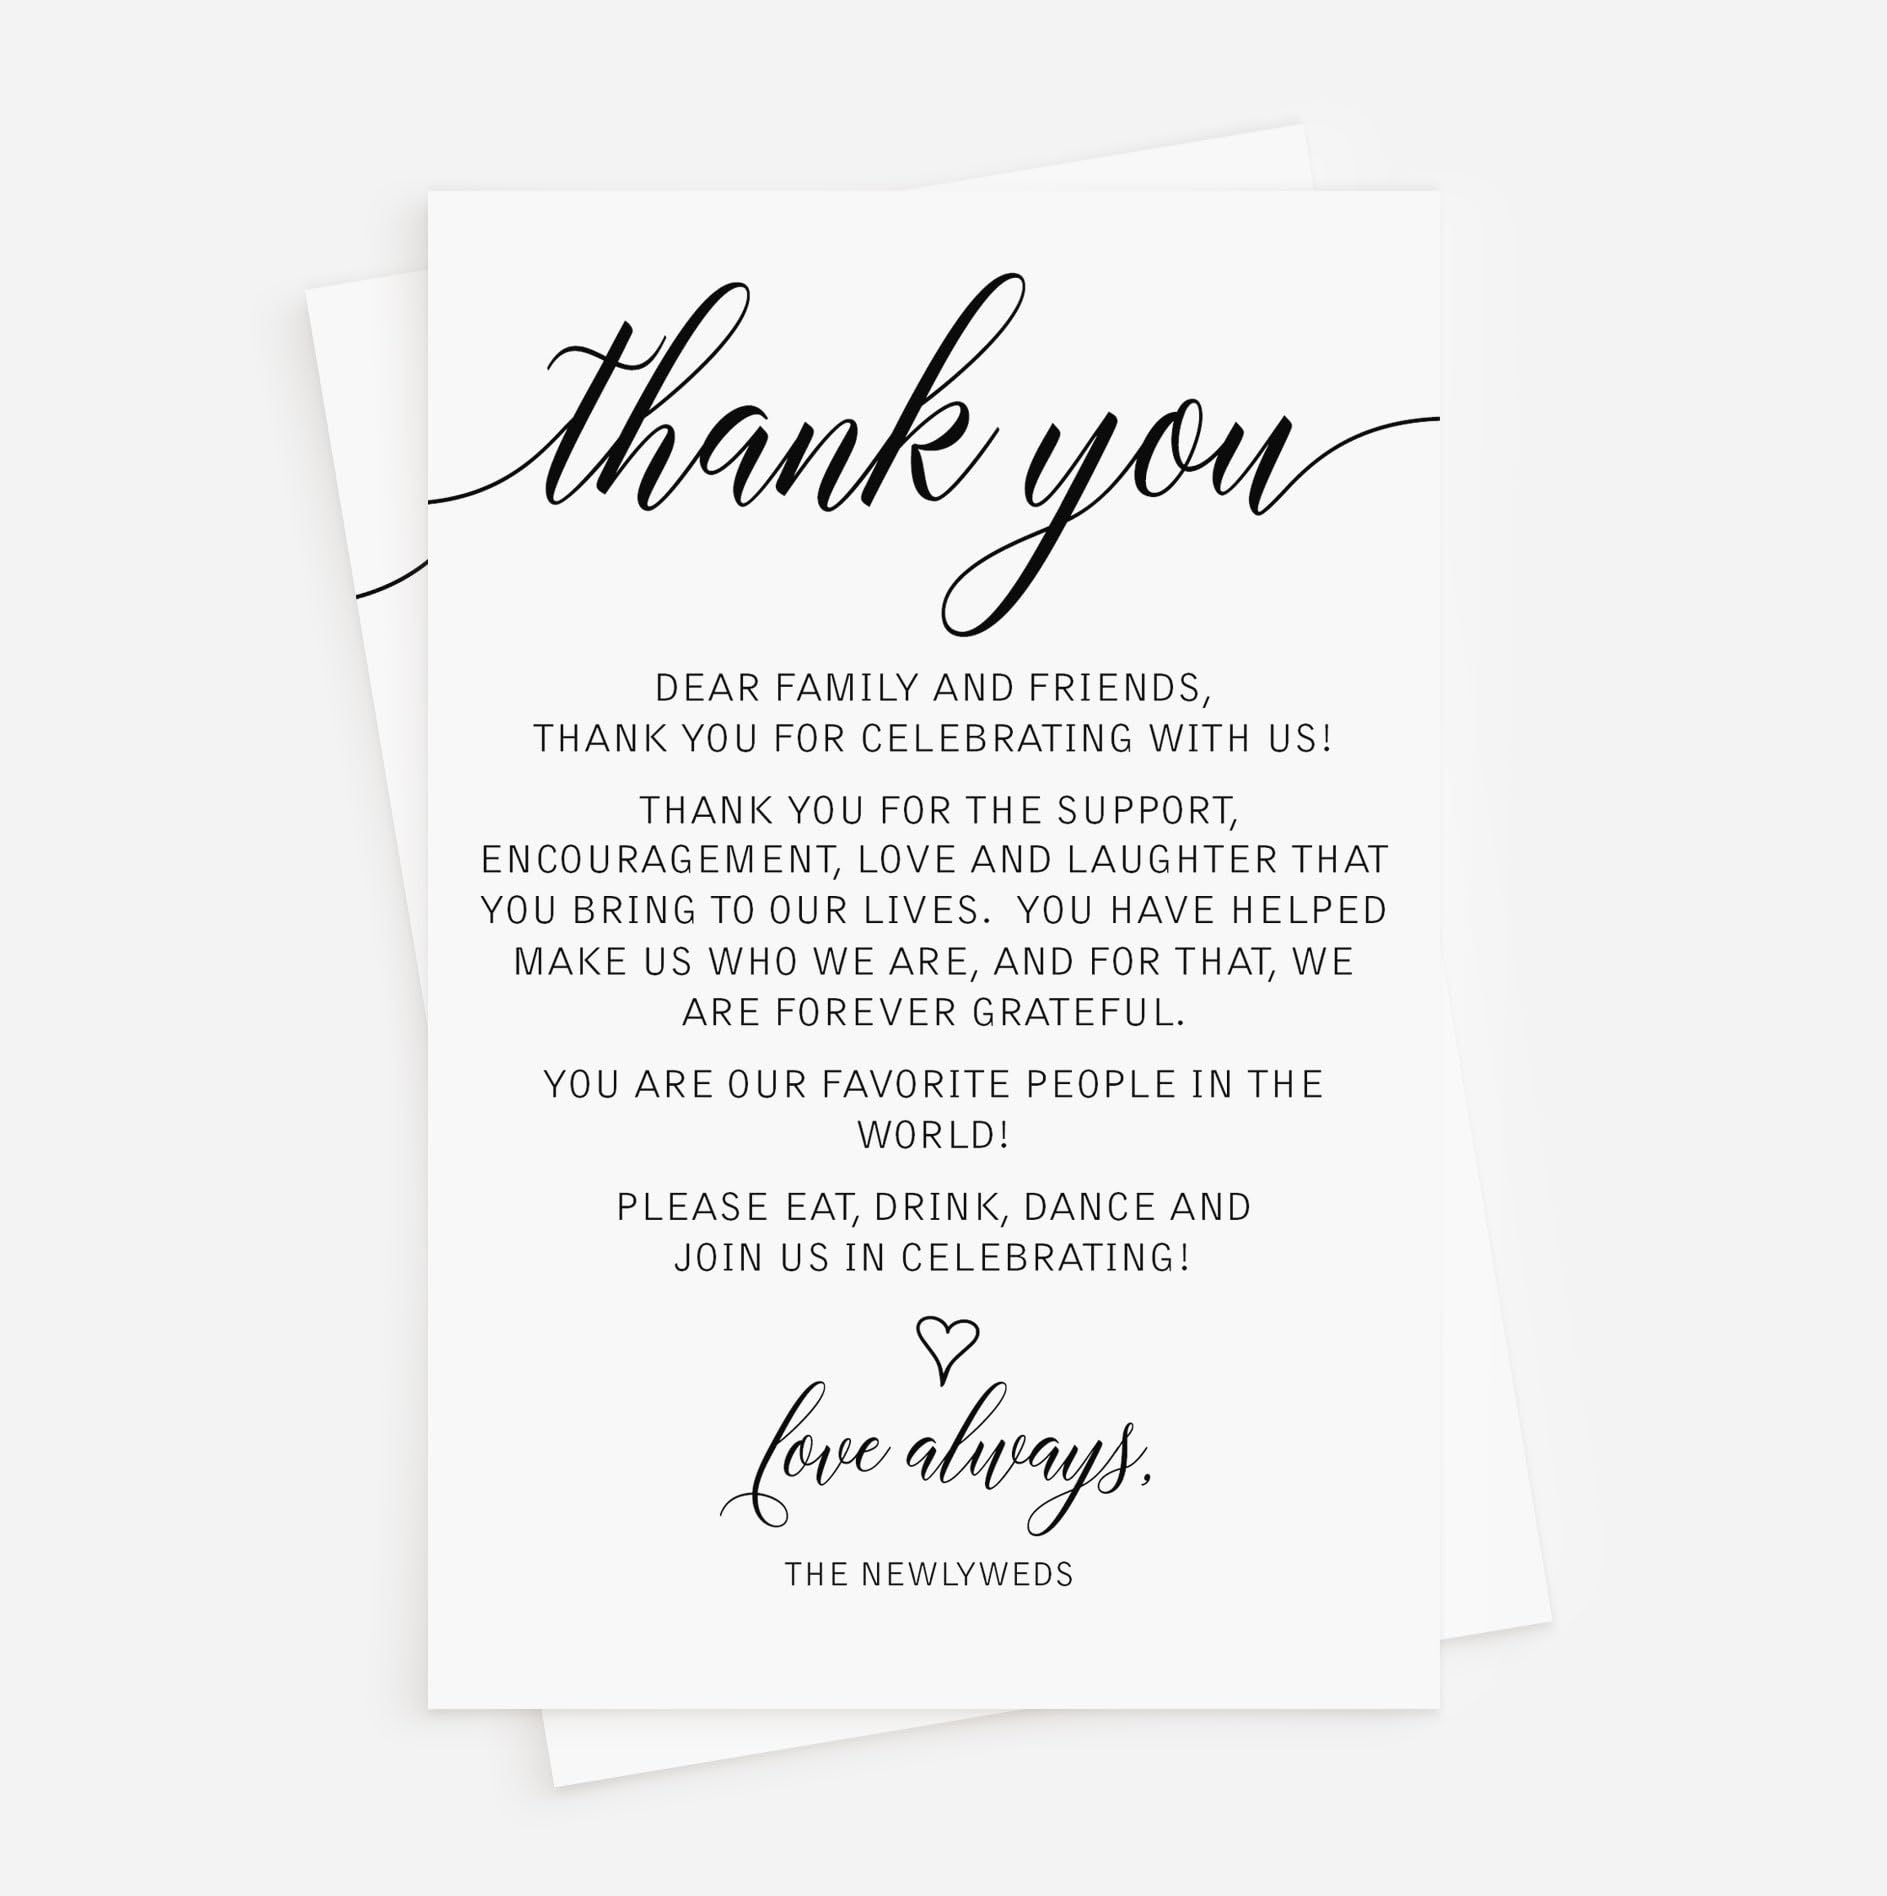 Thank you note with emphasis